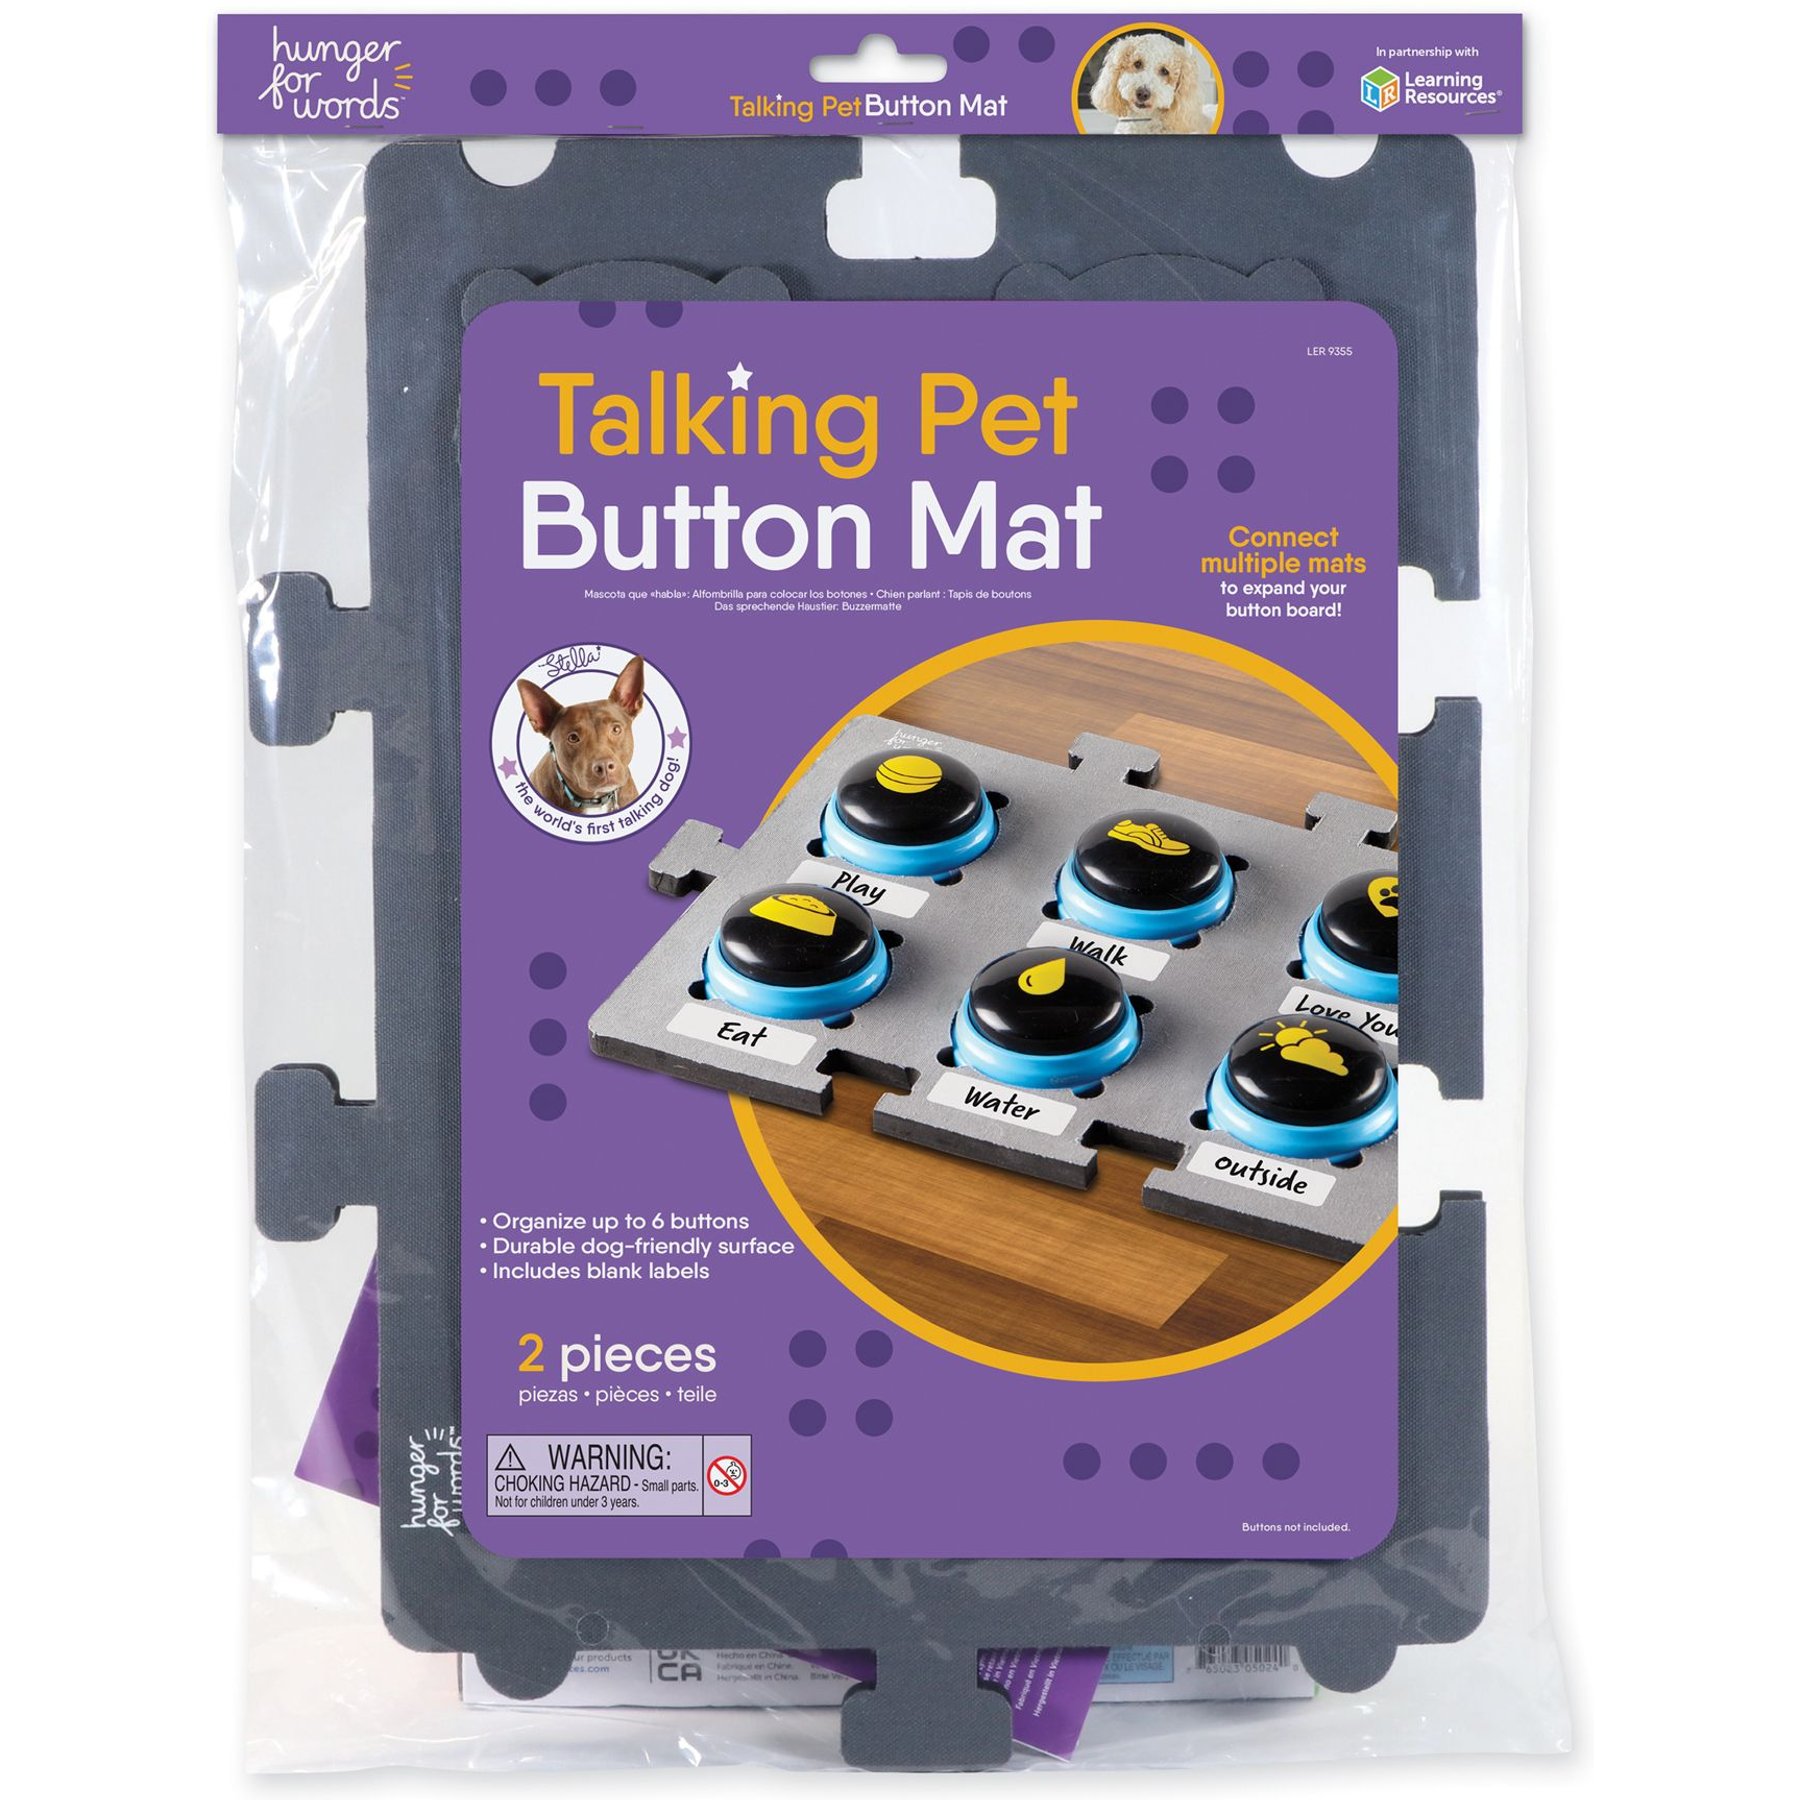 On Topic Off Topic Conversation Sorting Game Pets - ordering